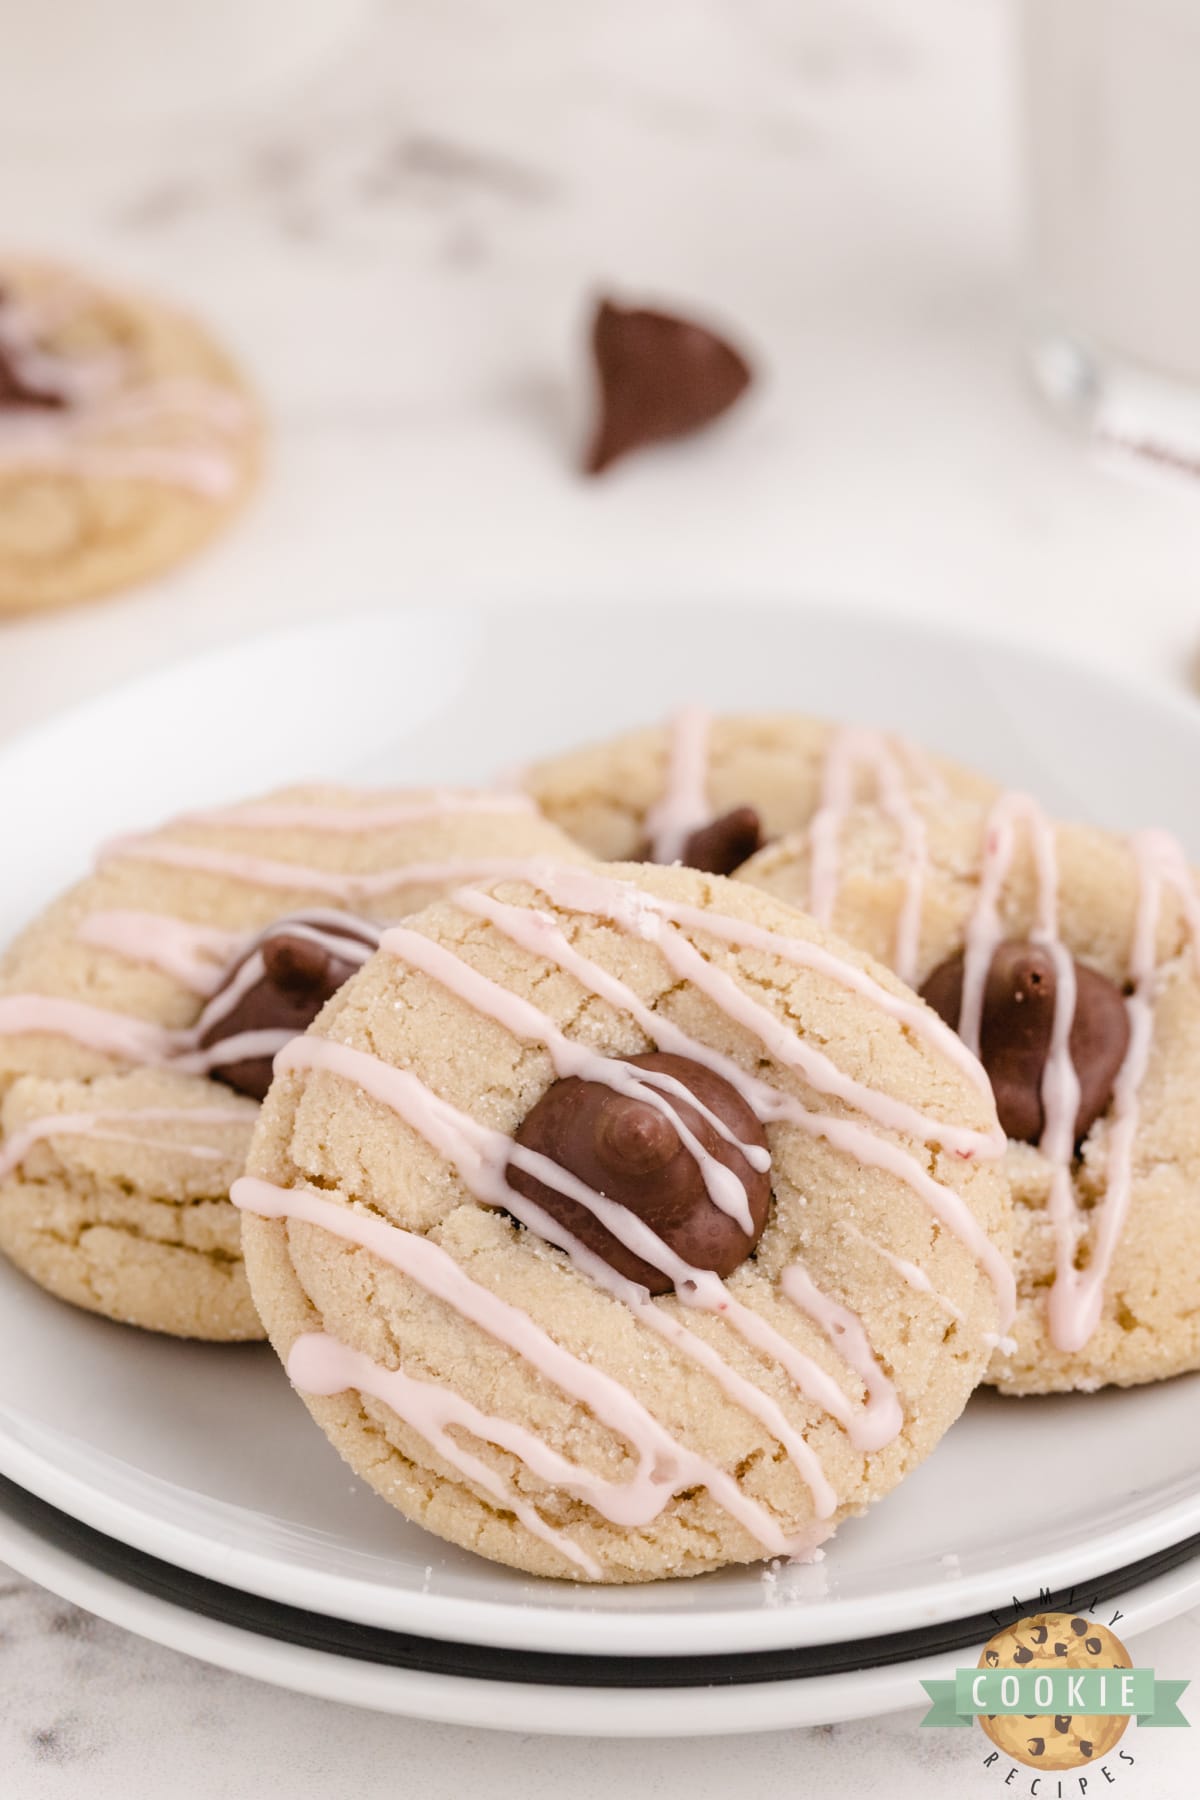 Almond Kiss Cookies made with almond extract and Hershey kisses with almonds! Drizzled with a simple raspberry glaze, these make a fantastic alternative to the traditional peanut butter blossoms!